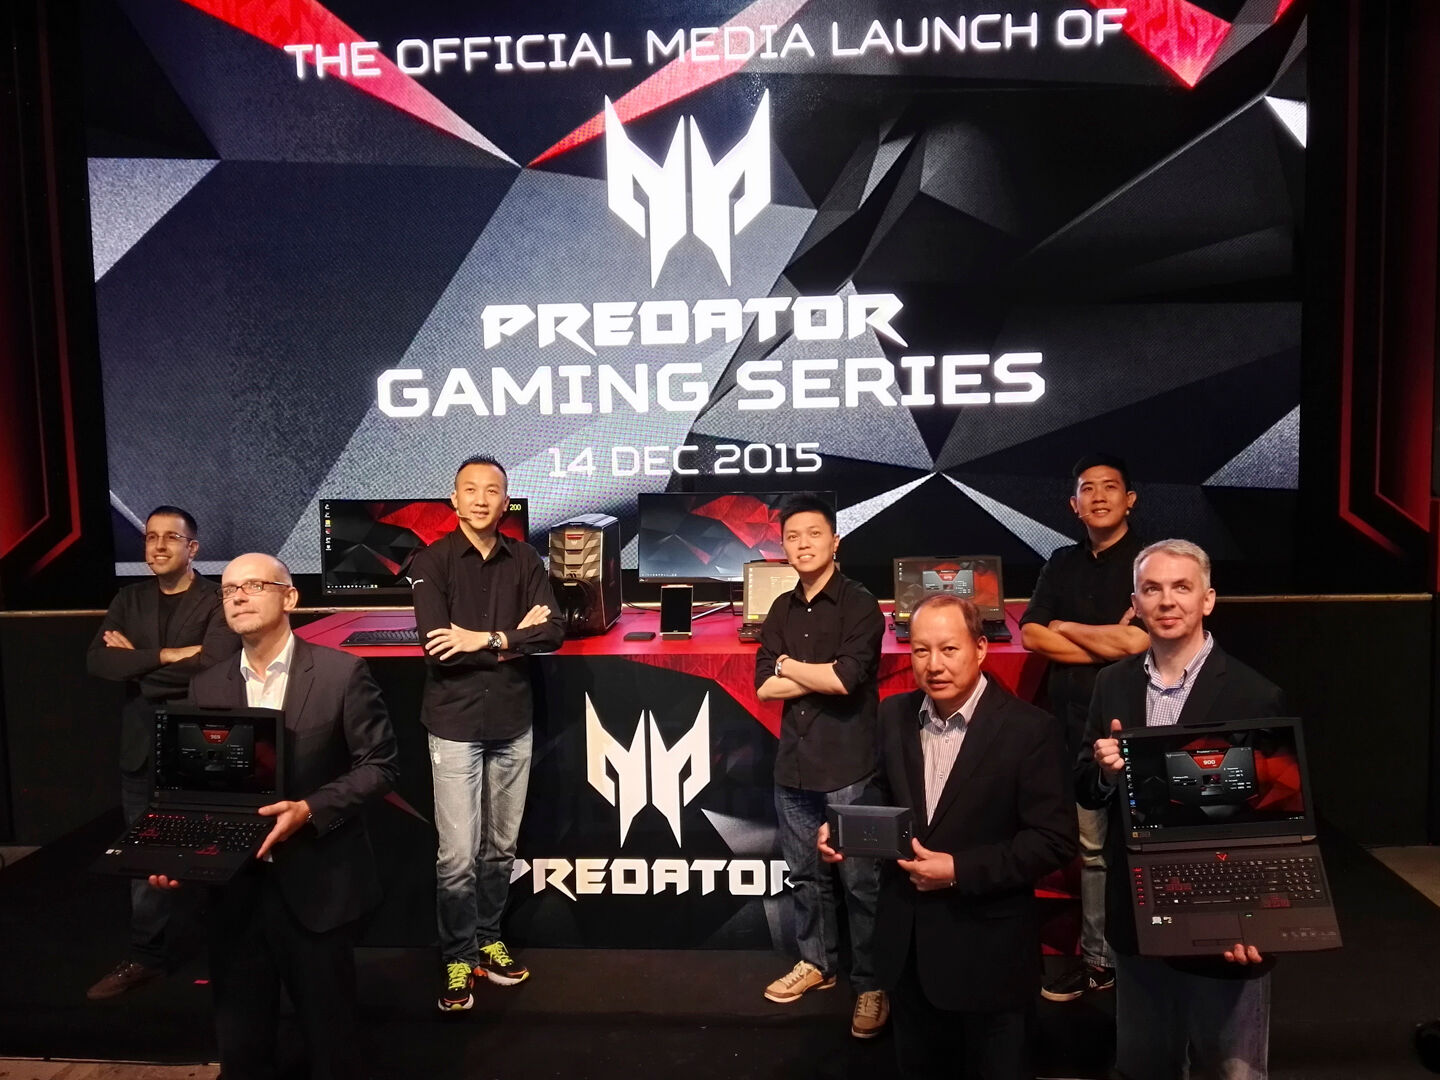 Acer Announces Predator 8 Gaming Tablet With Intel Atom x7 And Android 5.1